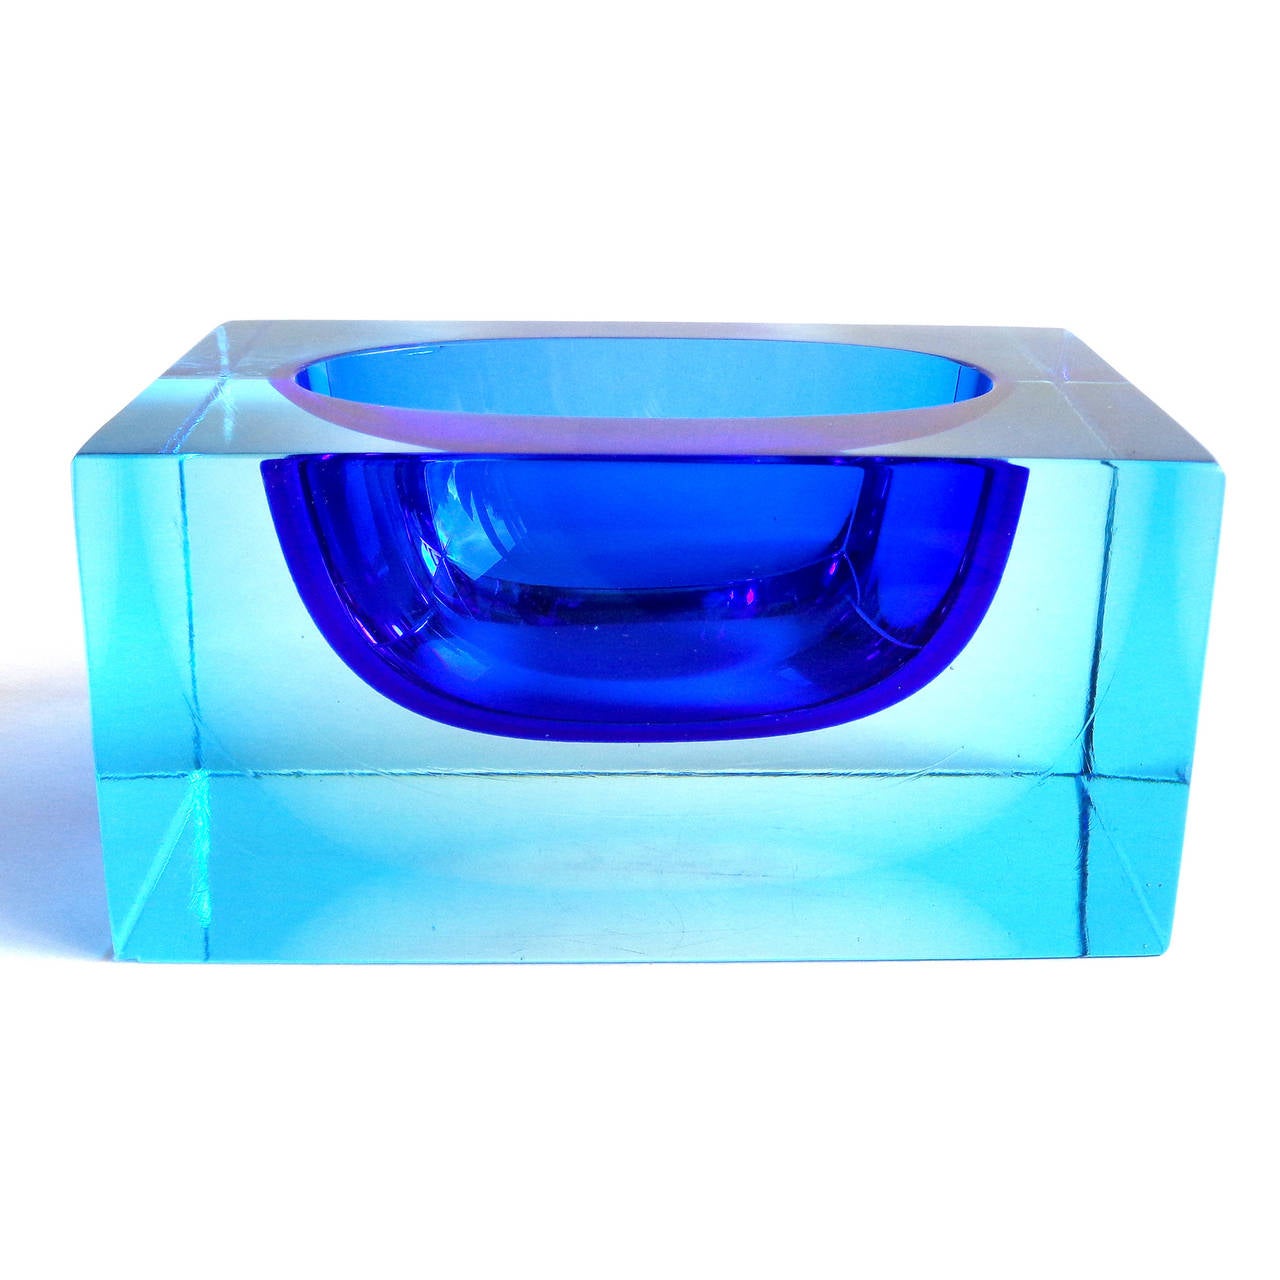 Free shipping worldwide! See details below description.

Amazing vintage Murano hand blown Sommerso cobalt and light blue rectangular art glass bowl. The piece is a solid glass block with a half submerged orb in the center. Super heavy and thick.